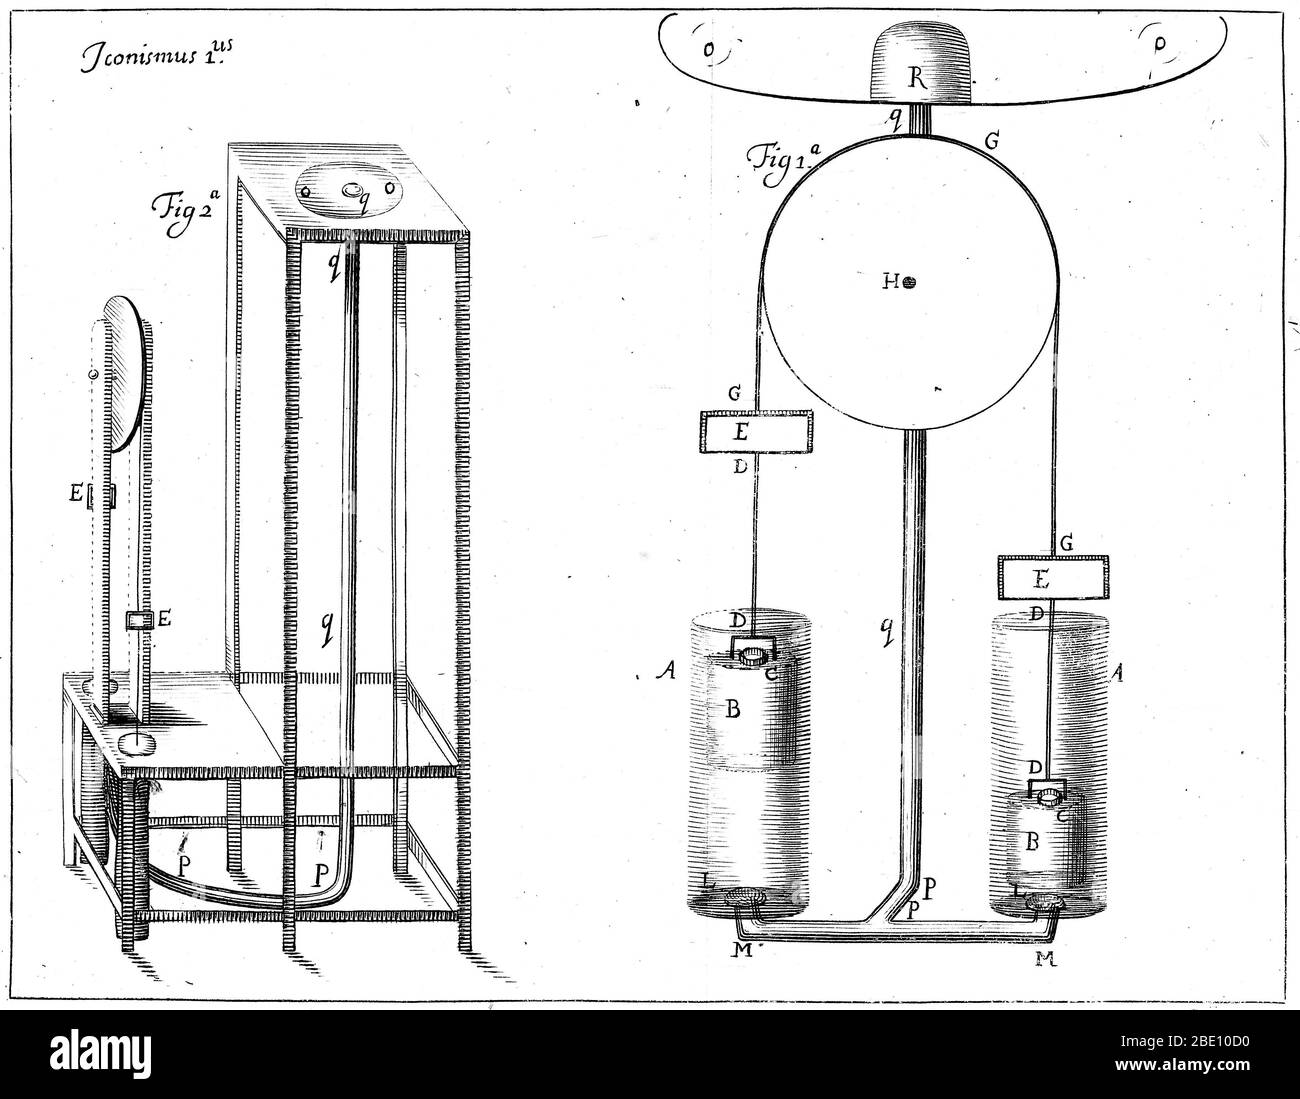 Robert Boyle's third air-pump, double-barreled, 1682. Robert Boyle (1627-1691) was a 17th-century natural philosopher, chemist, physicist, and inventor. Though his research clearly has its roots in the alchemical tradition, Boyle is largely regarded today as the first modern chemist, and therefore one of the founders of modern chemistry, and one of the pioneers of modern experimental scientific method. He is best known for Boyle's law, which describes the inversely proportional relationship between the absolute pressure and volume of a gas, if the temperature is kept constant within a closed s Stock Photo